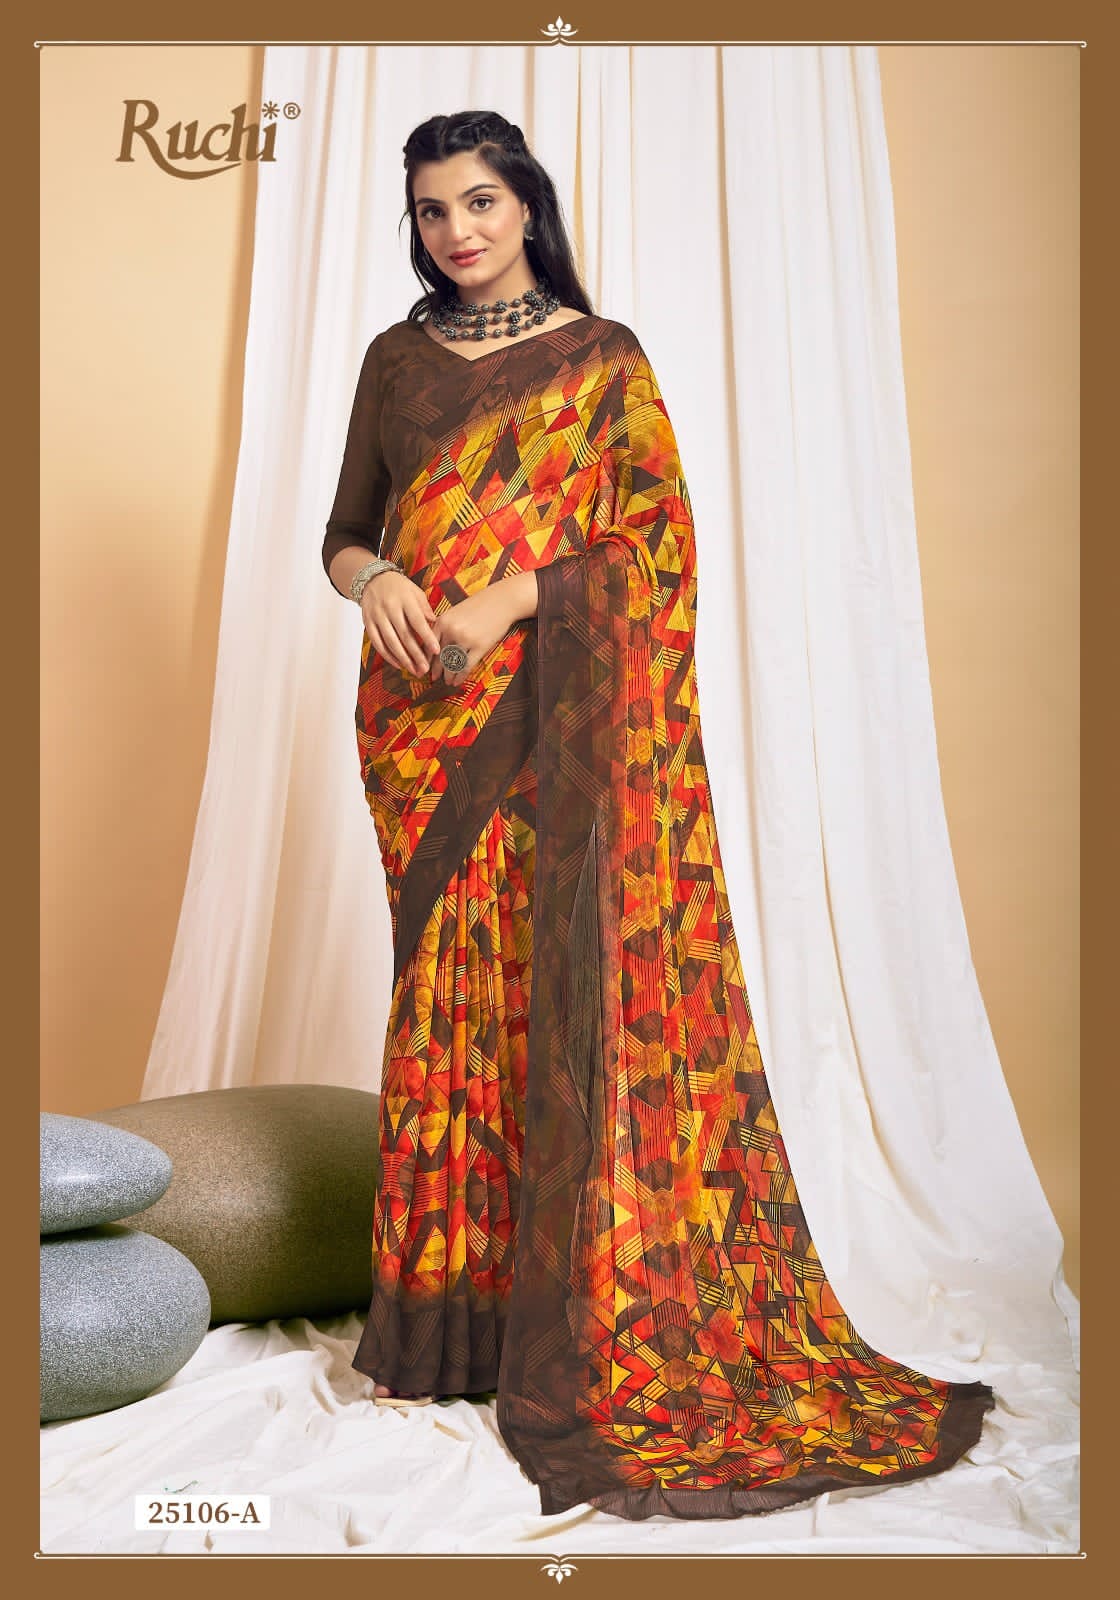 Buy Kashvi sarees Georgette Blend Ready to wear Saree  (Combo_1108_2_1336_Multi_One Size) at Amazon.in